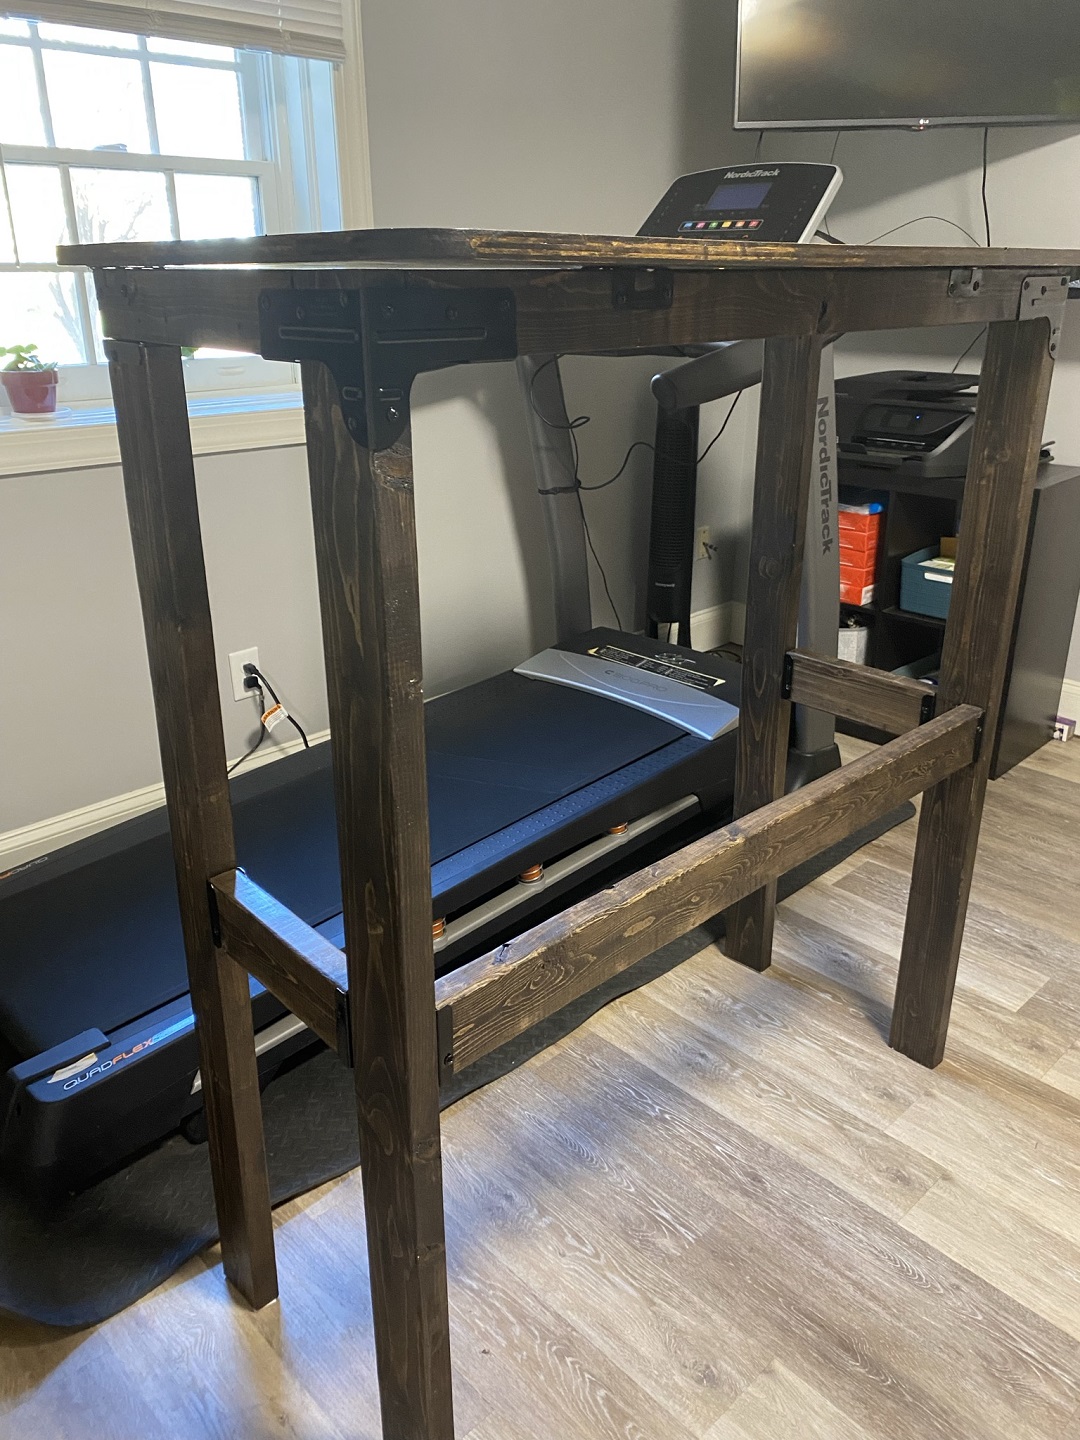 Side view of the DIY treadmill desk